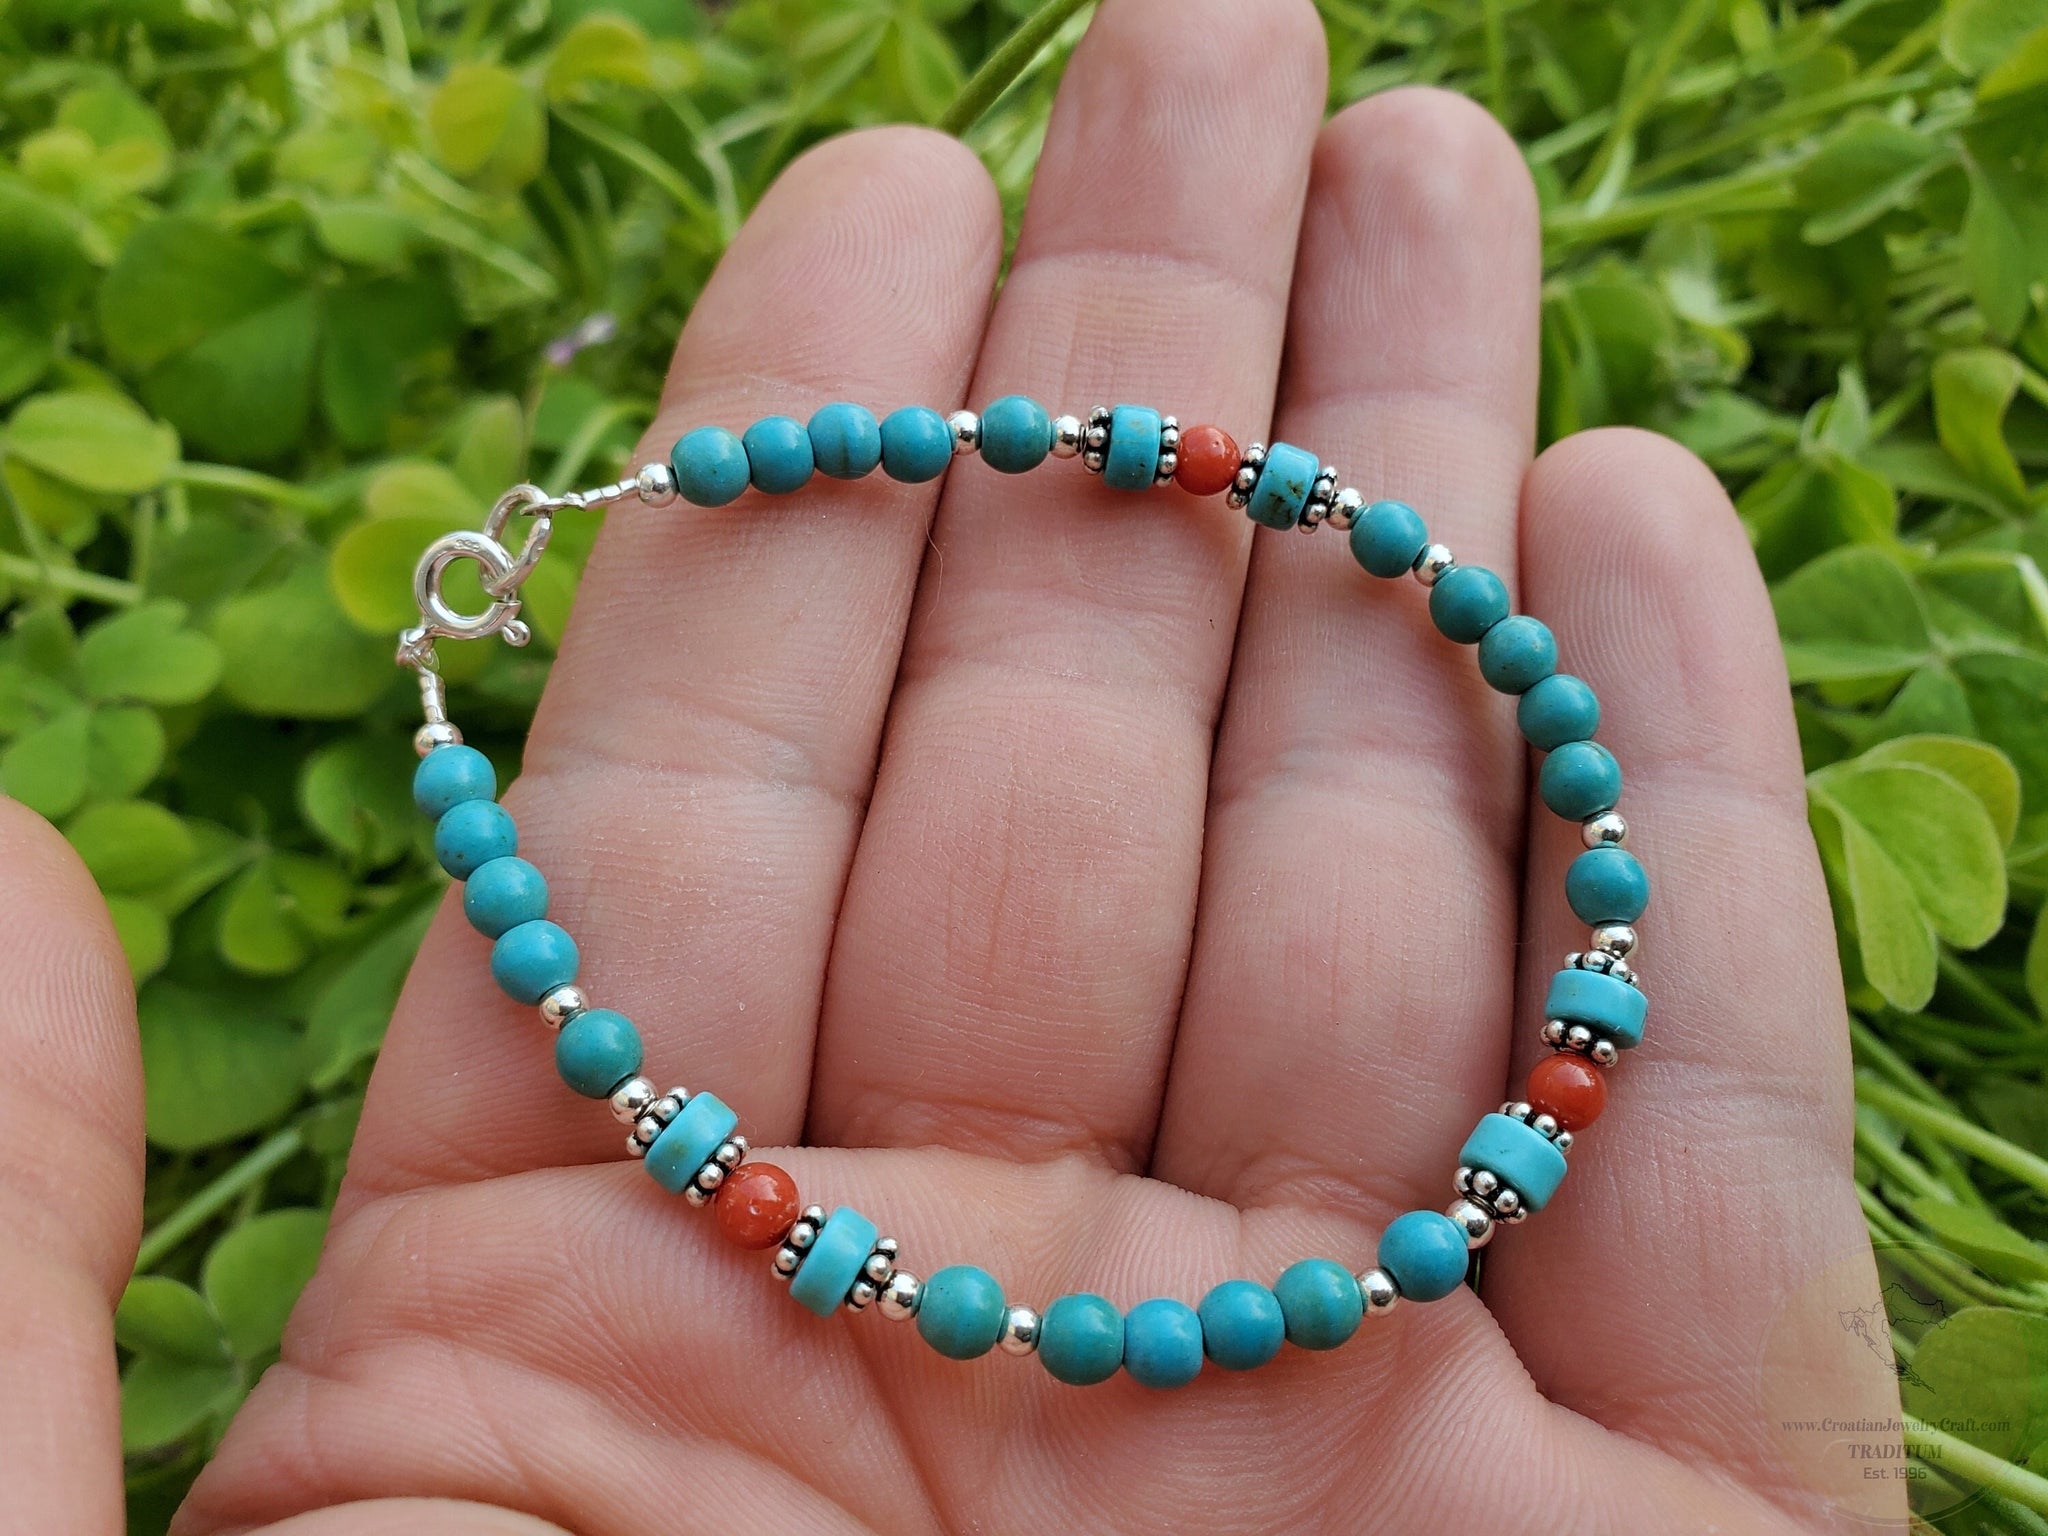 Amazon.com: Healing Bracelets for Women - Turquoise Bracelet - Healing  Prayers Crystal Bracelet, 8mm Natural Stone Anti Anxiety Stress Relief Yoga  Beads Get Well Soon Gifts : Handmade Products